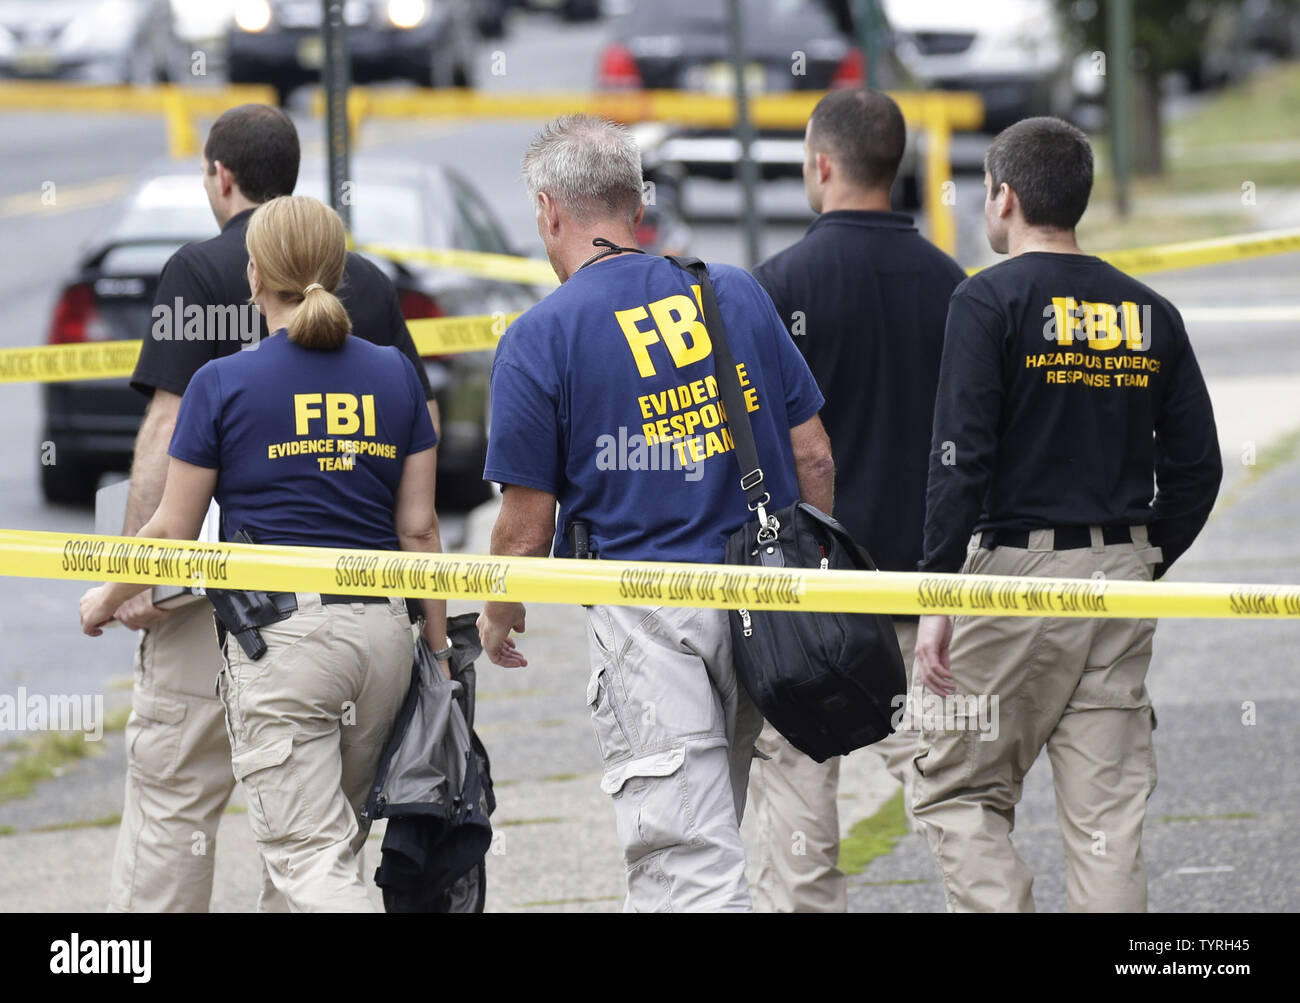 FBI investigators and police walk away from First American Fried Chicken after Ahmad Khan Rahami, the man responsible for the New York and New Jersey bombings, was apprehended by police on September 19, 2016 in Elizabeth, New Jersey. Two days before, an explosion from a bomb went off on West 23rd Street in Manhattan around 8:30 p.m. on Saturday, injuring 29 people on West 23rd Street in Manhattan. The man responsible for the explosion in Manhattan on Saturday night and an earlier bombing in New Jersey, Ahmad Khan Rahami, was taken into custody on Monday after he was wounded in a gunfight with Stock Photo